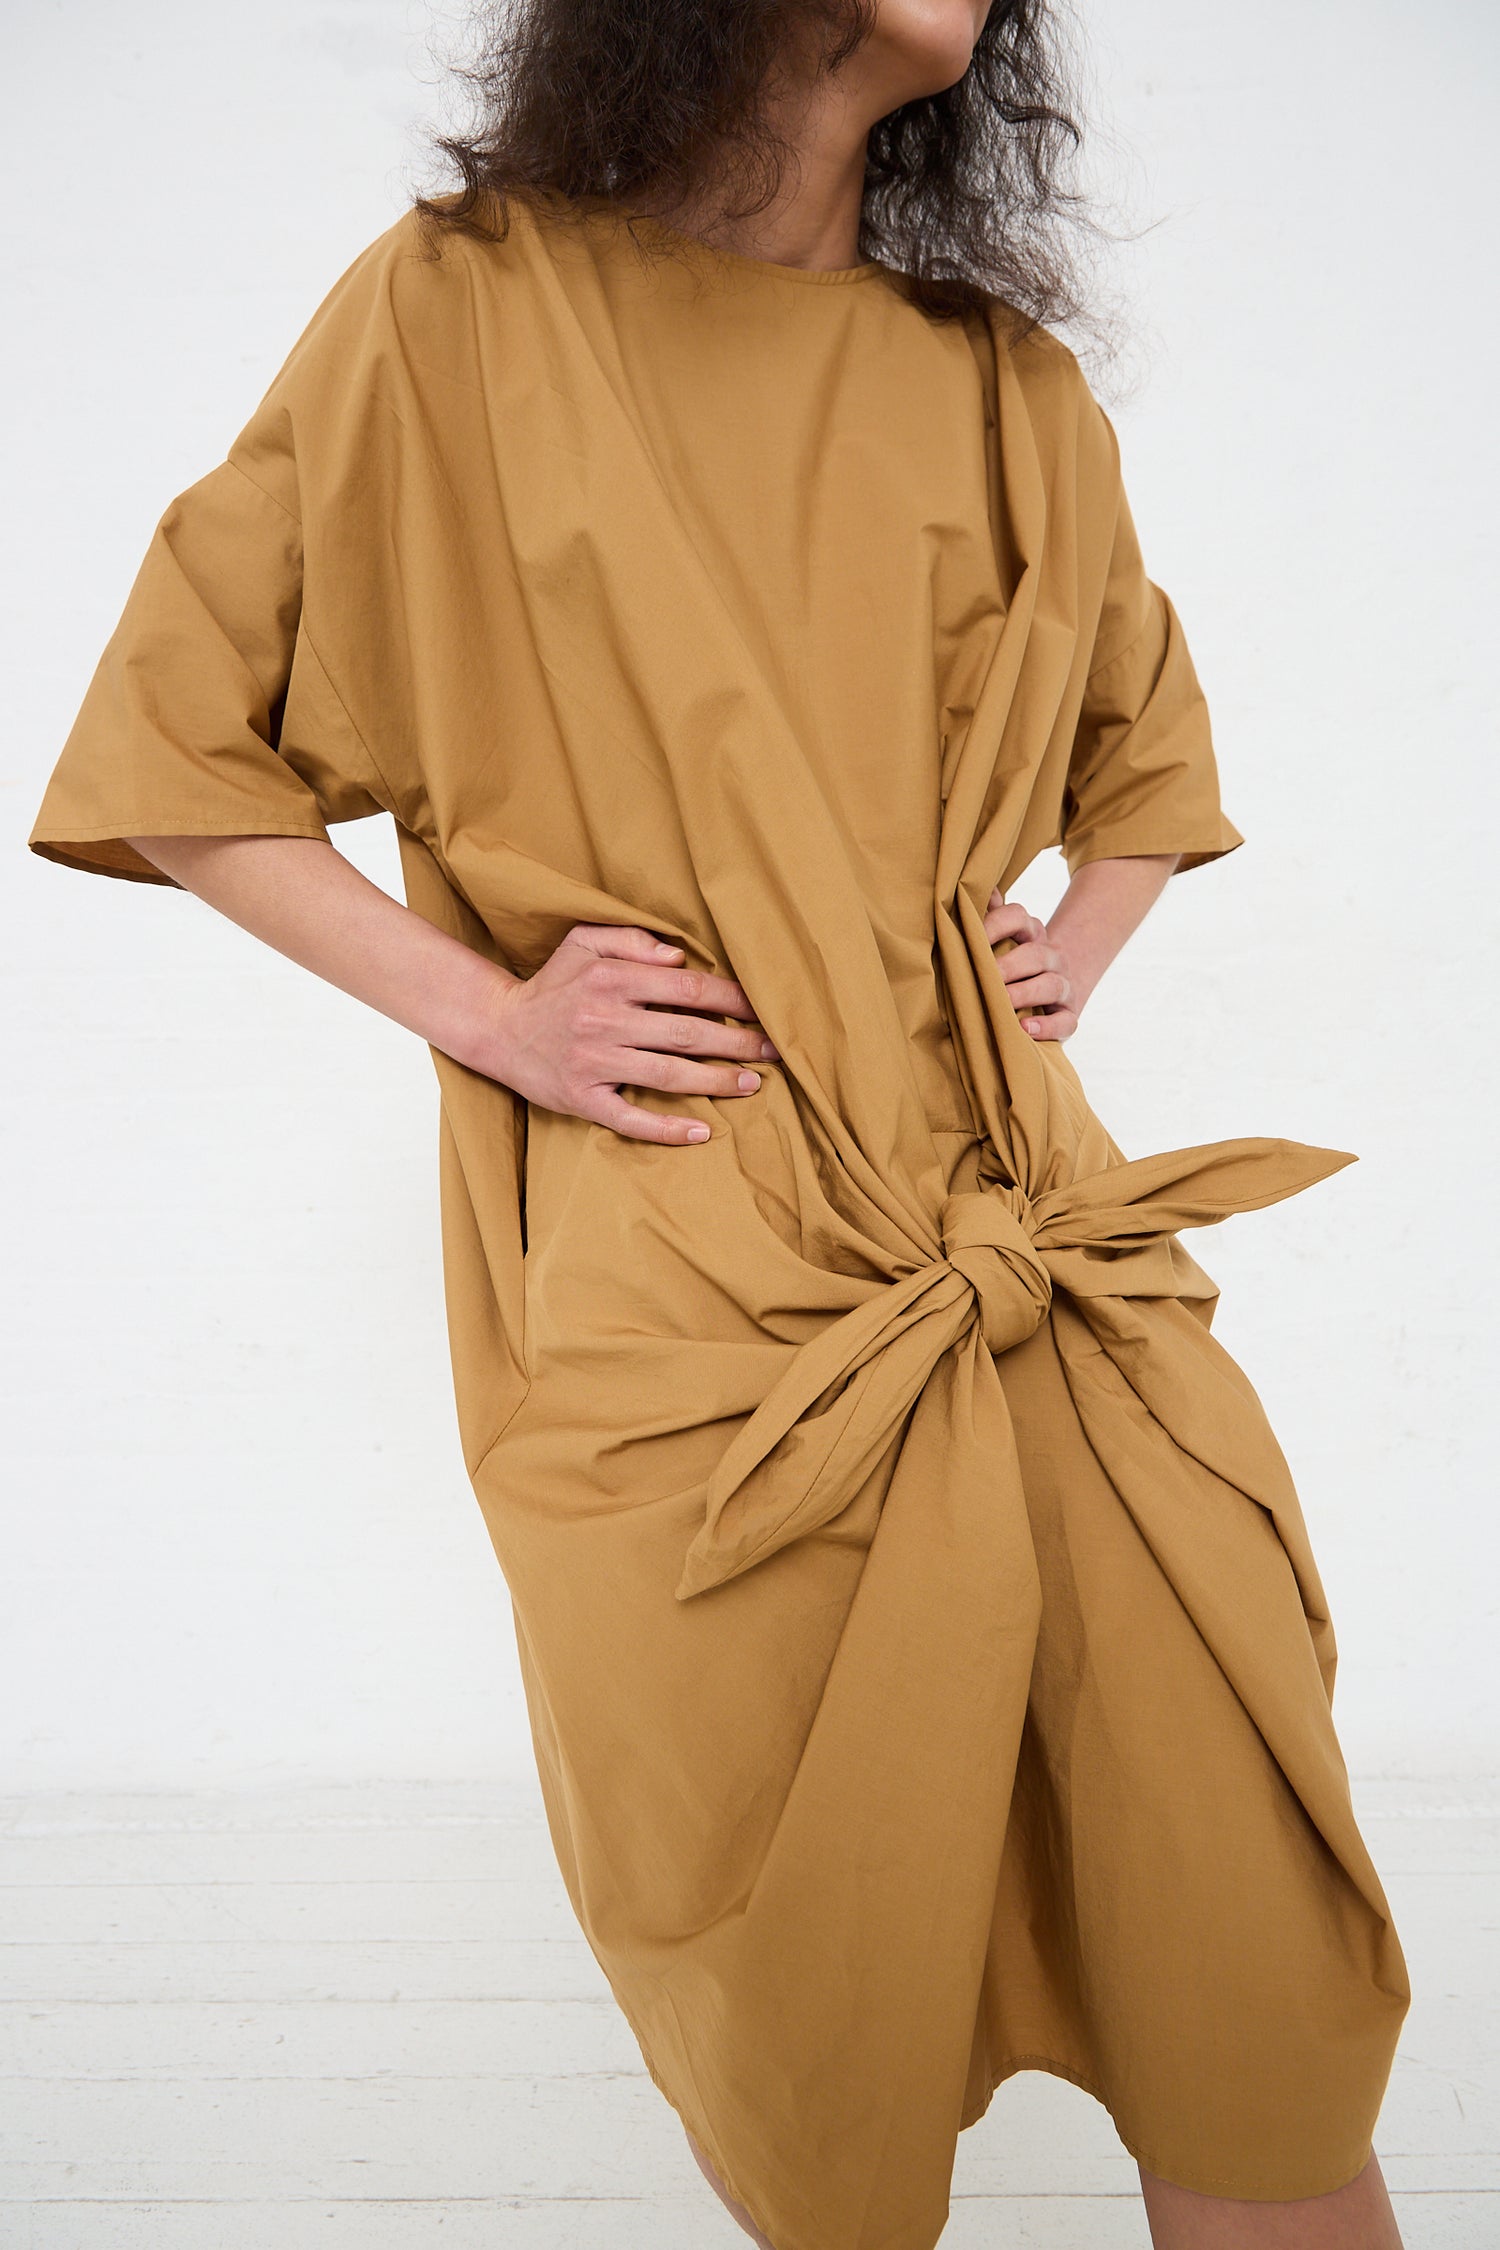 Woman in a Black Crane Organic Cotton Bow Dress in Camel standing against a white background.